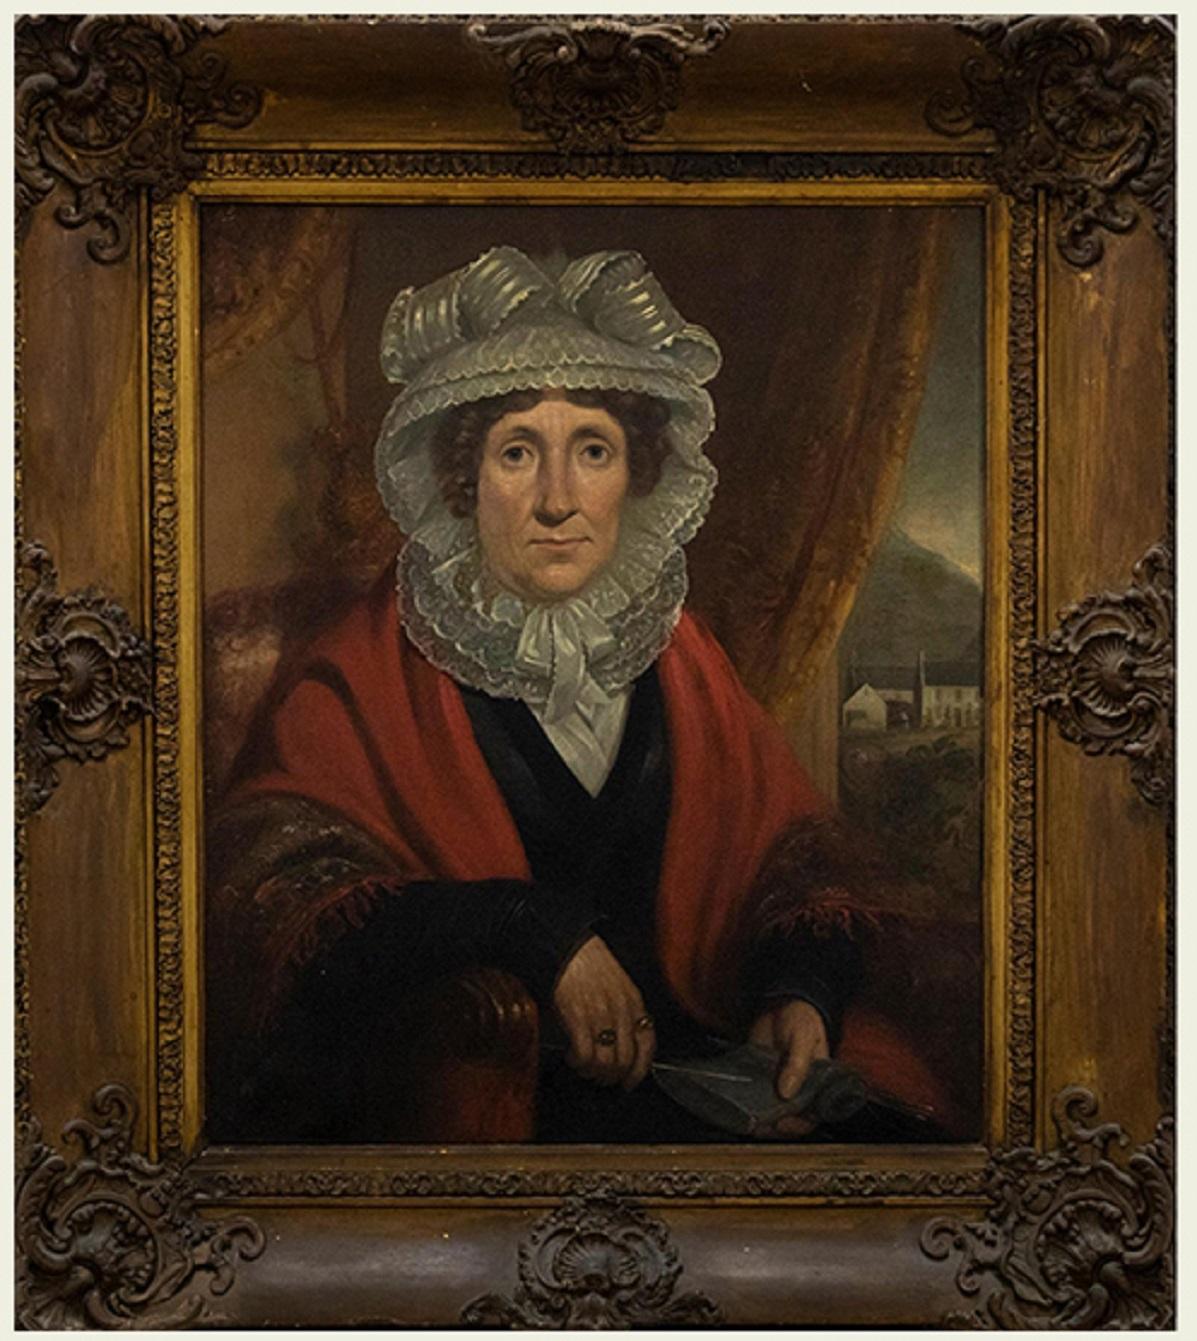 A truly unique and eye catching 19th Century portrait, showing a striking woman in a vibrant red shawl and elaborate lace bonnet. The rich tapestry on the sleeves of her shawl, the delicate lace work of the bonnet and her glistening rings on her